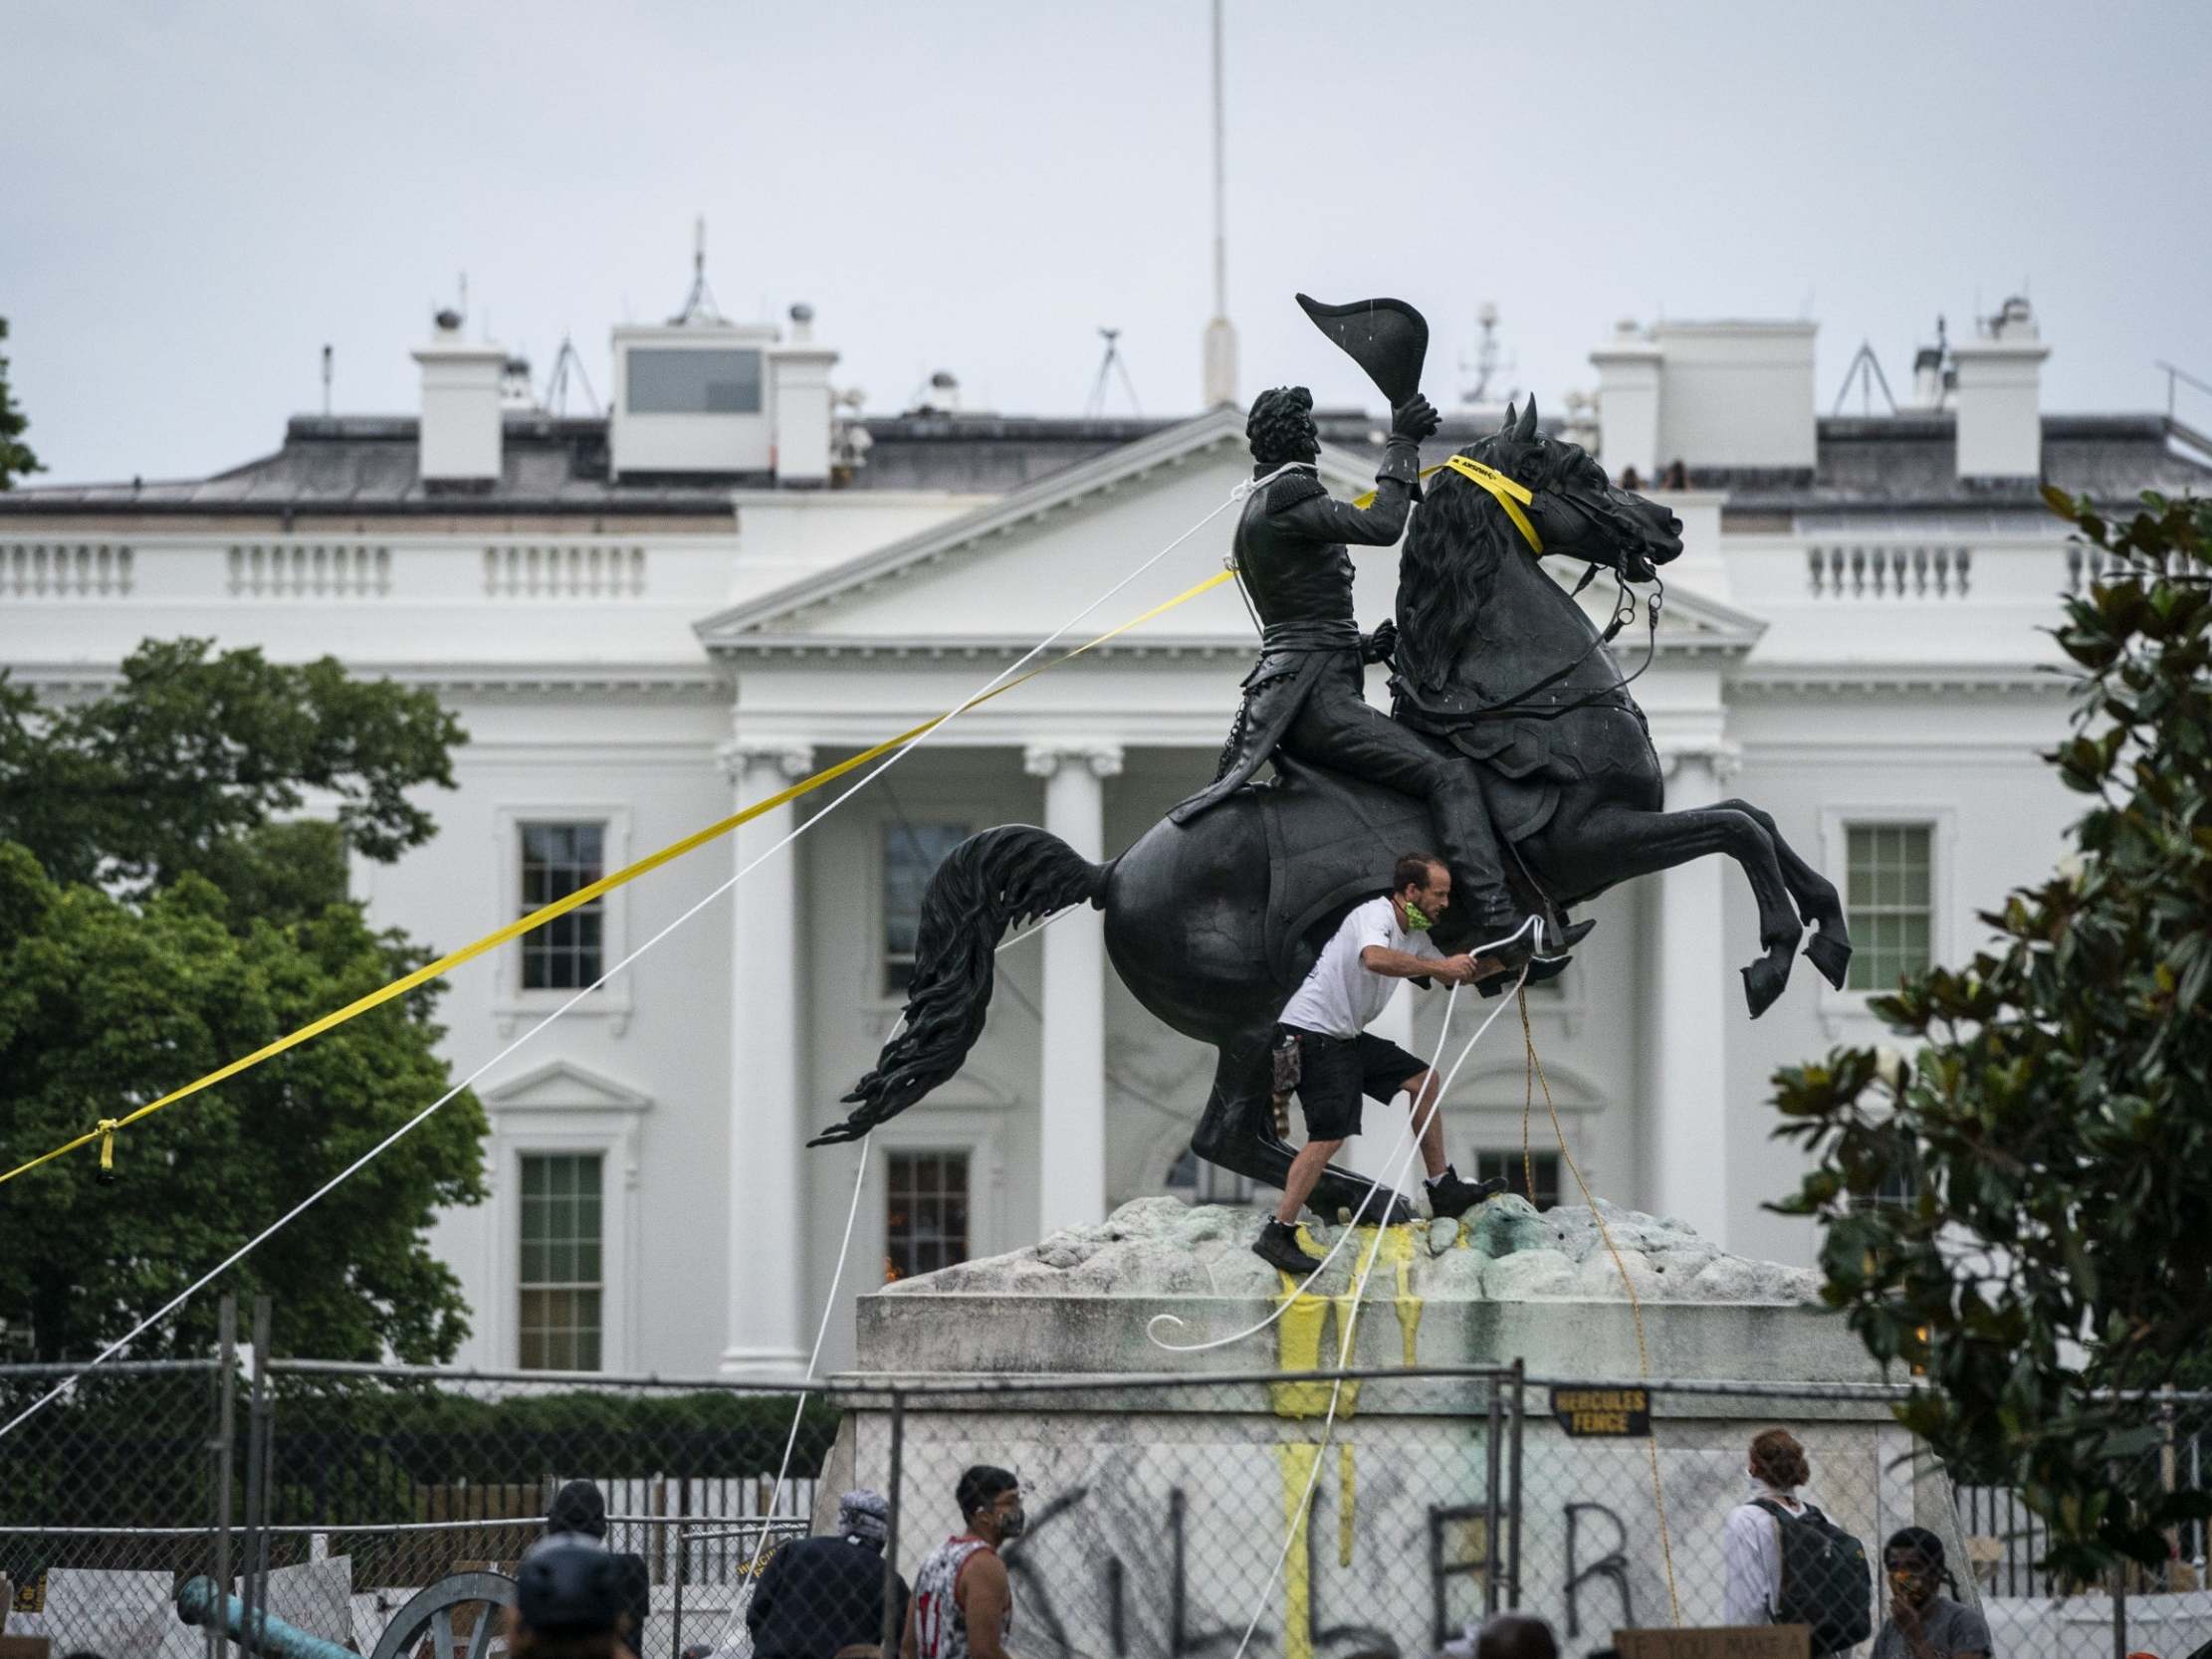 Police intervened before protesters were able to topple the monument